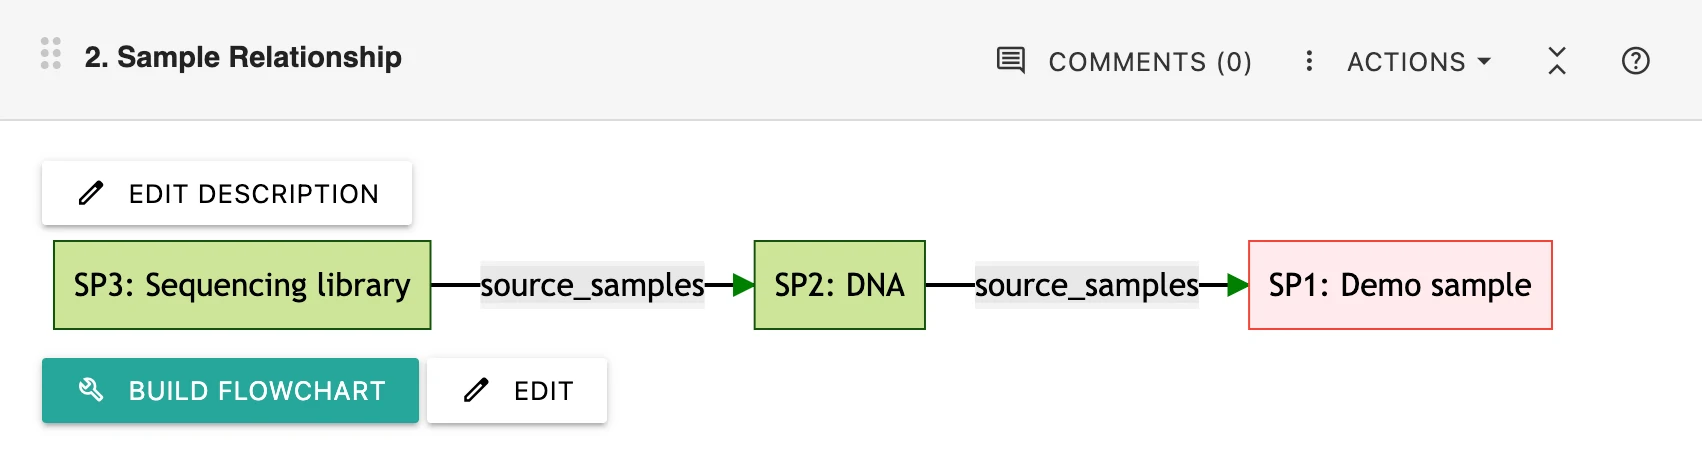 Mapping Sample Lineage in Labii for Easy Tracking